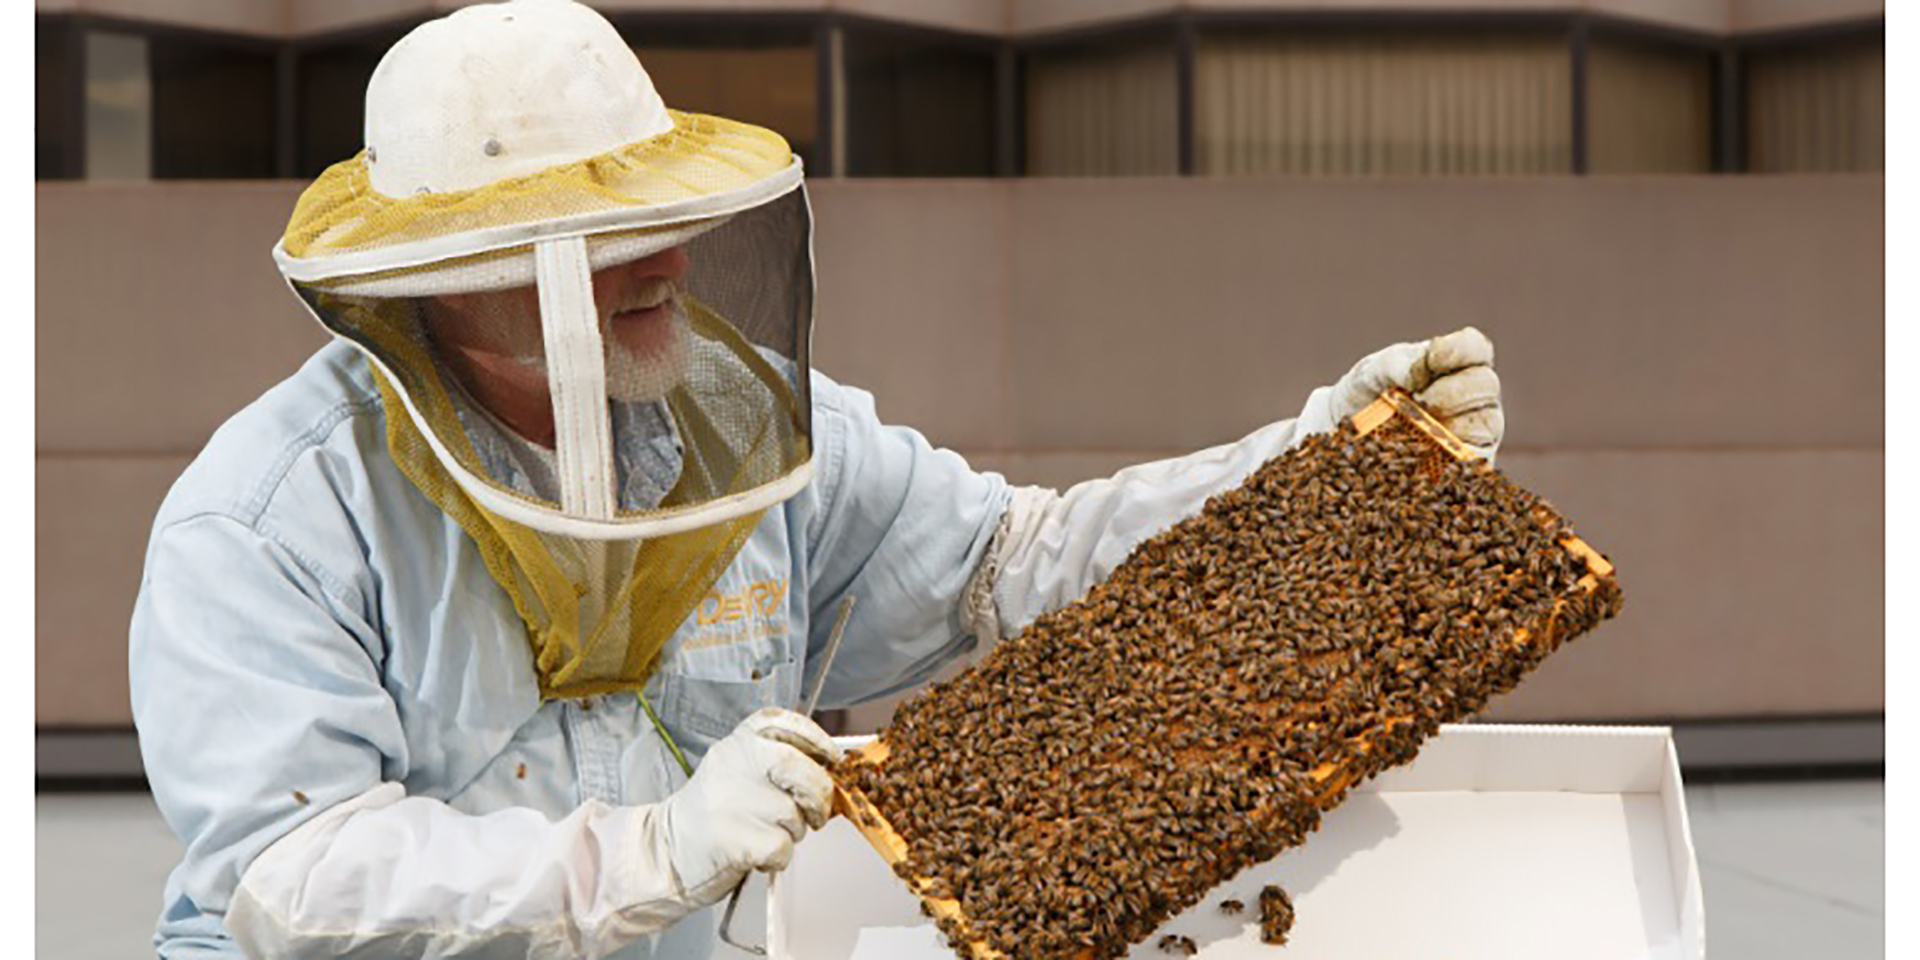 Ritz-Carlton Hotel contributes to global efforts to revive honeybee population by housing them in their properties 